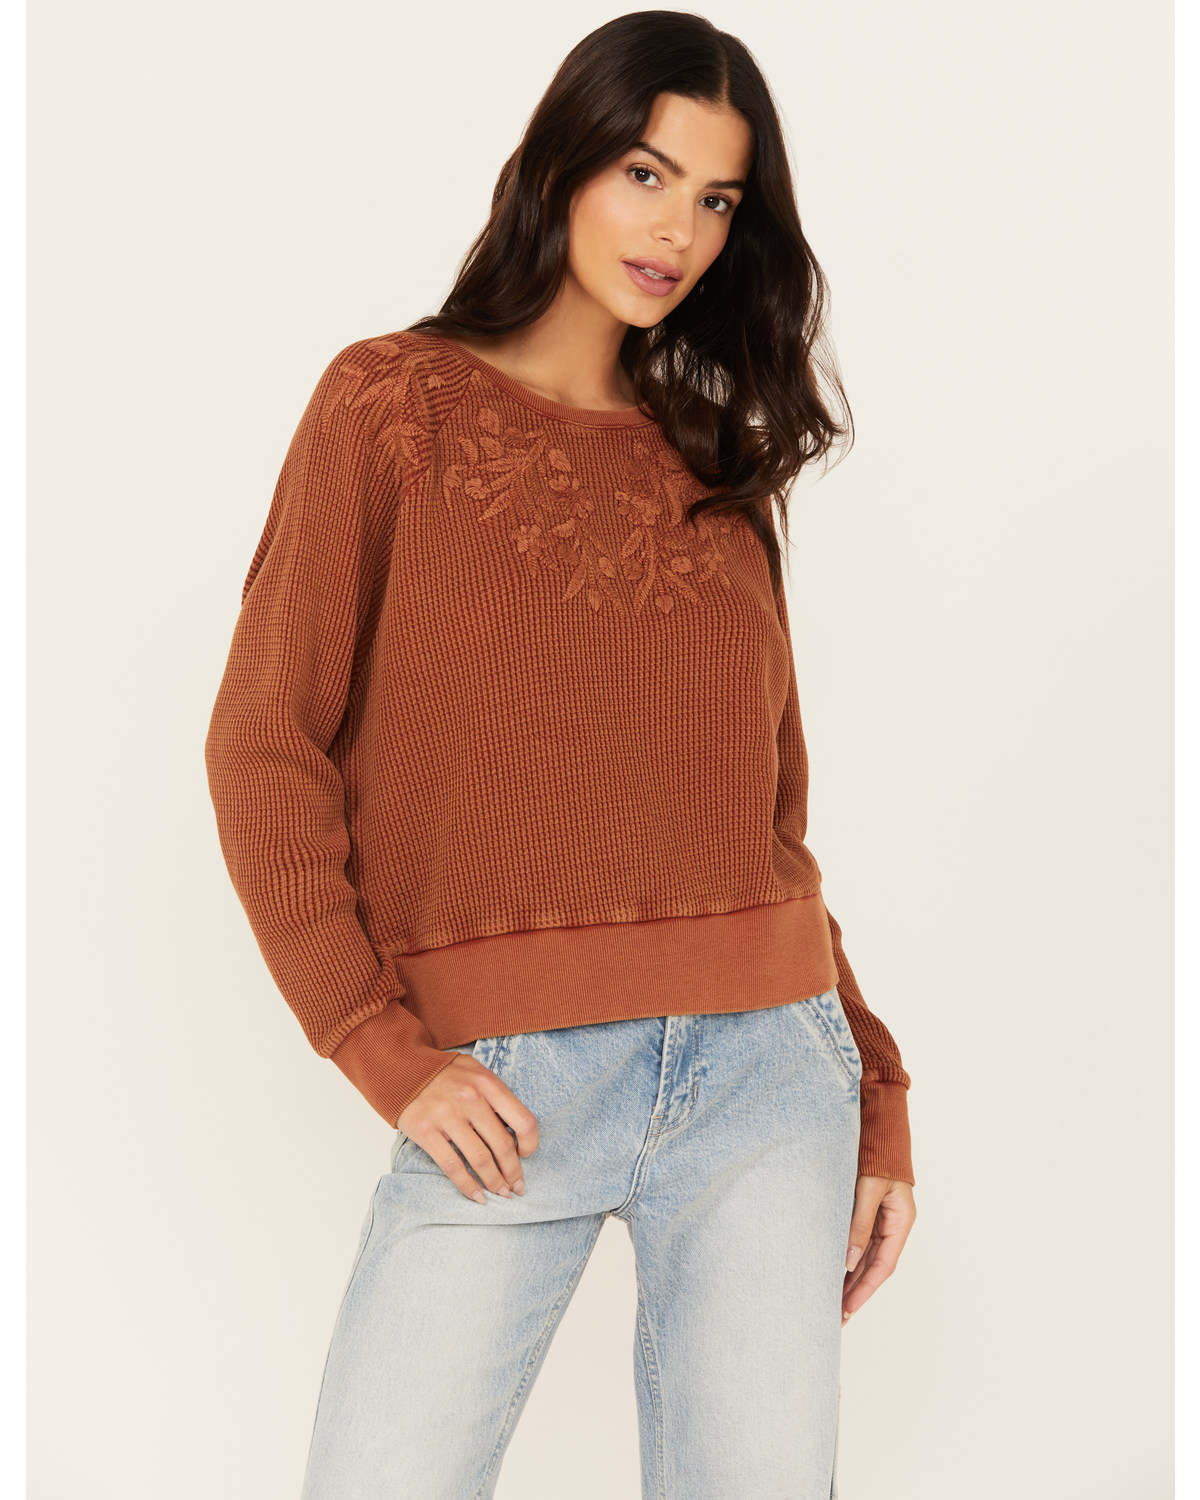 Cleo + Wolf Women's Embroidered Thermal Knit Top